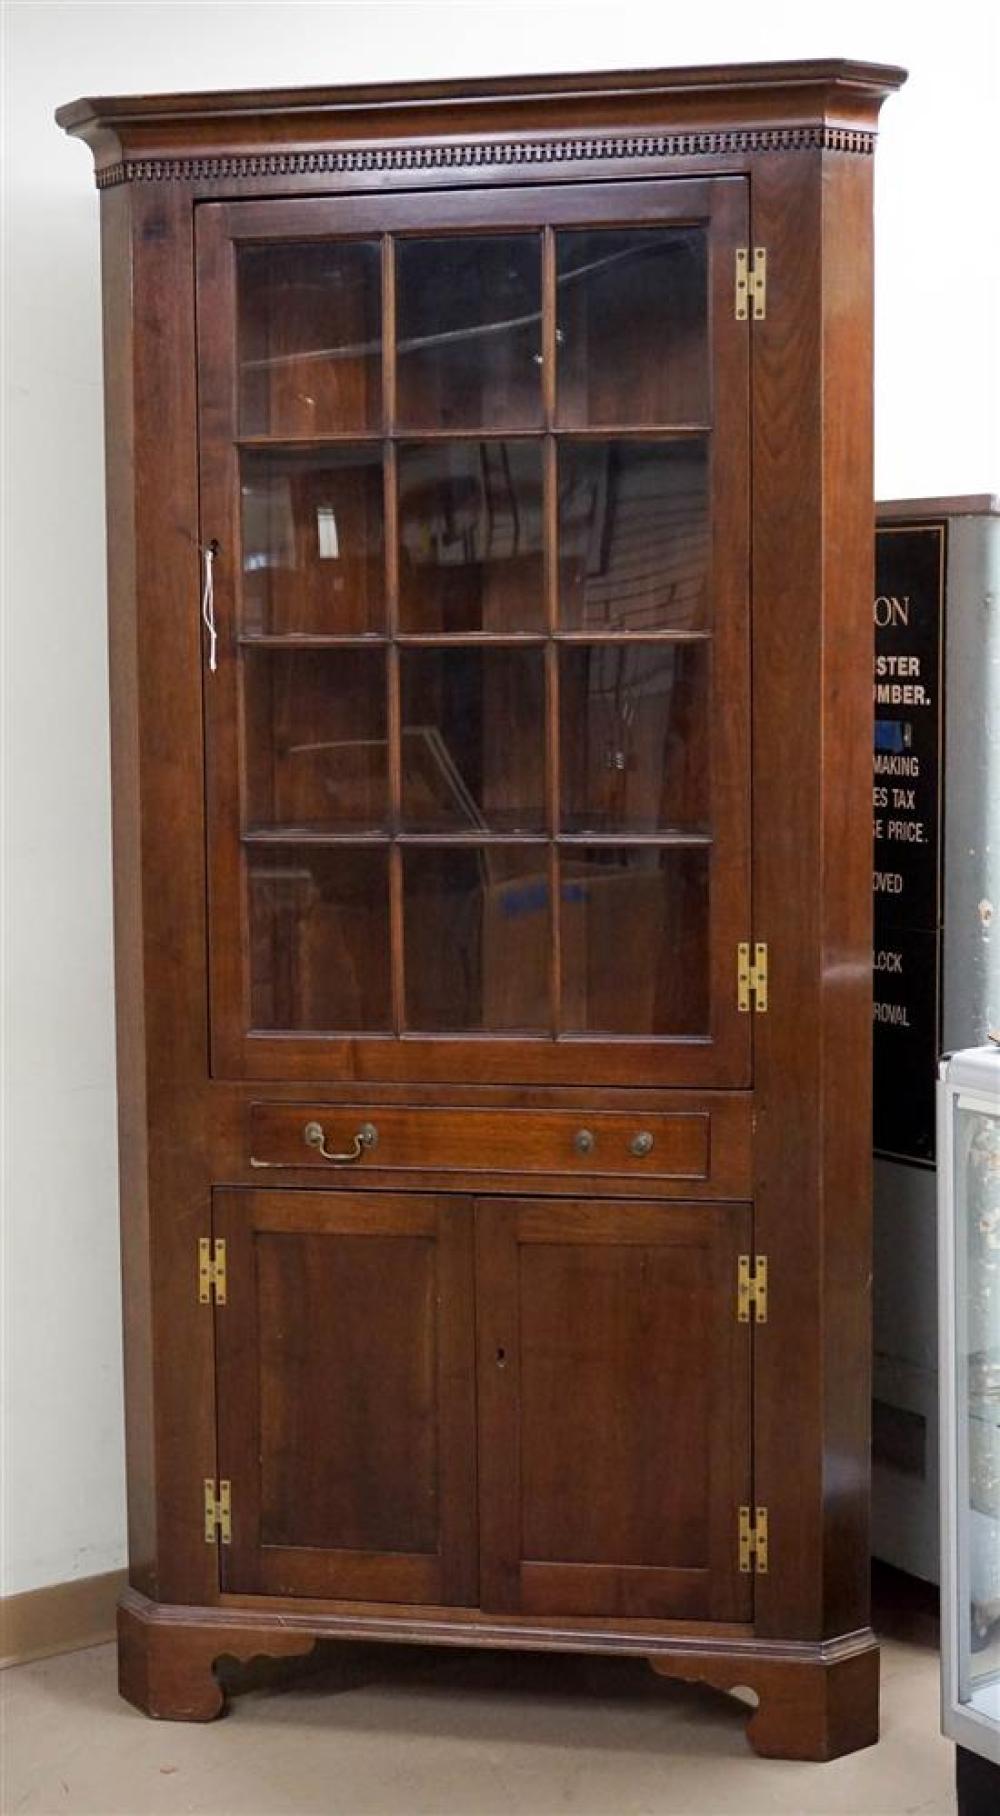 CHIPPENDALE STYLE MAHOGANY CORNER CABINETChippendale